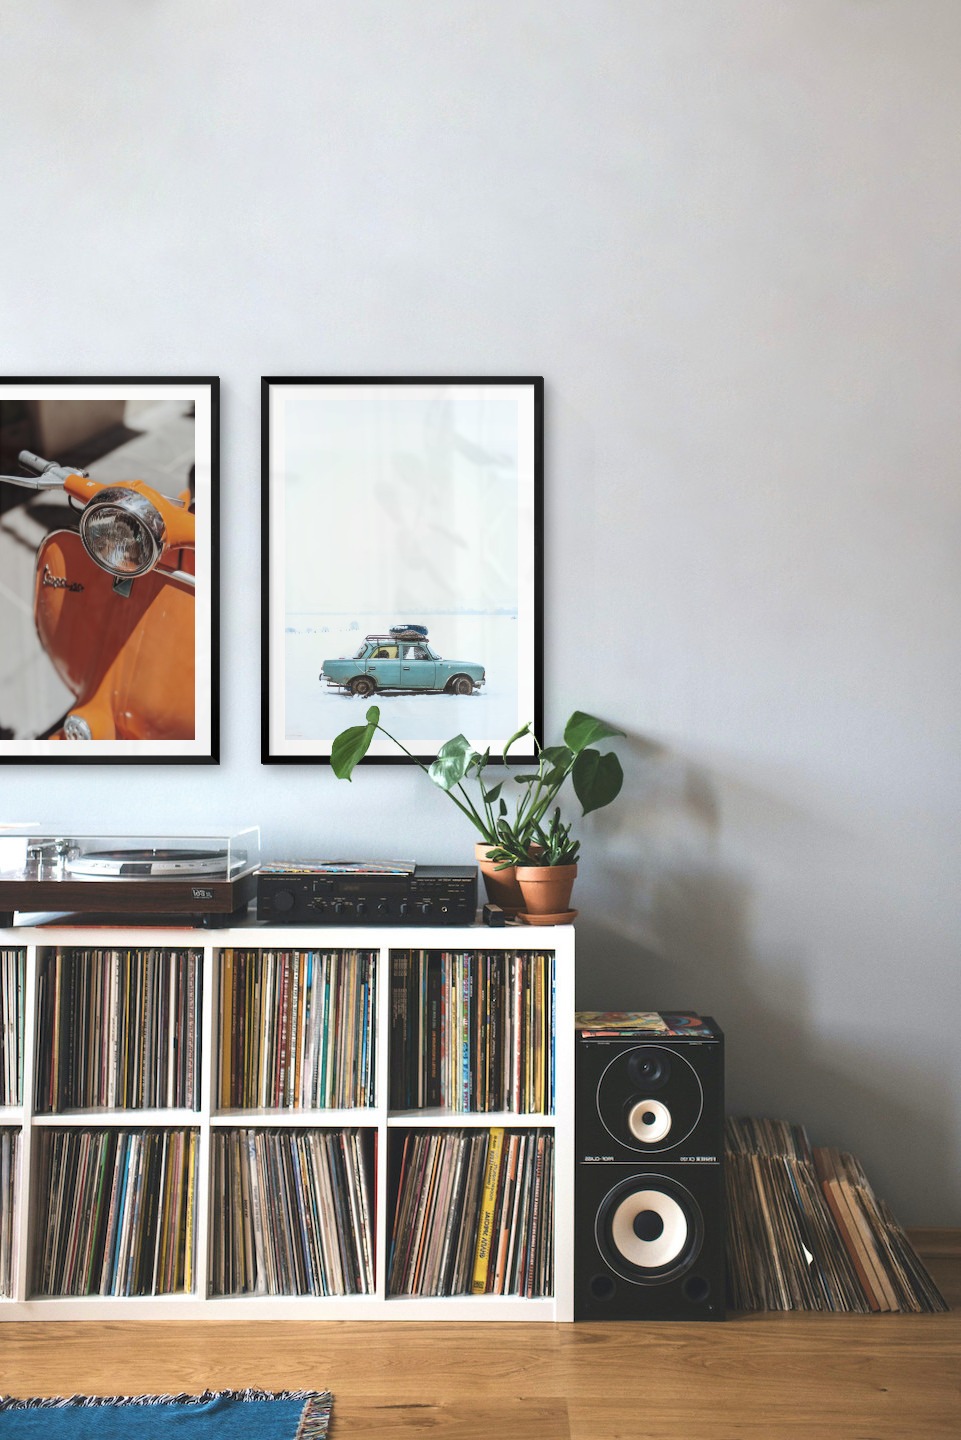 Gallery wall with picture frames in black in sizes 50x70 with prints "Orange vespa" and "Car in snow"